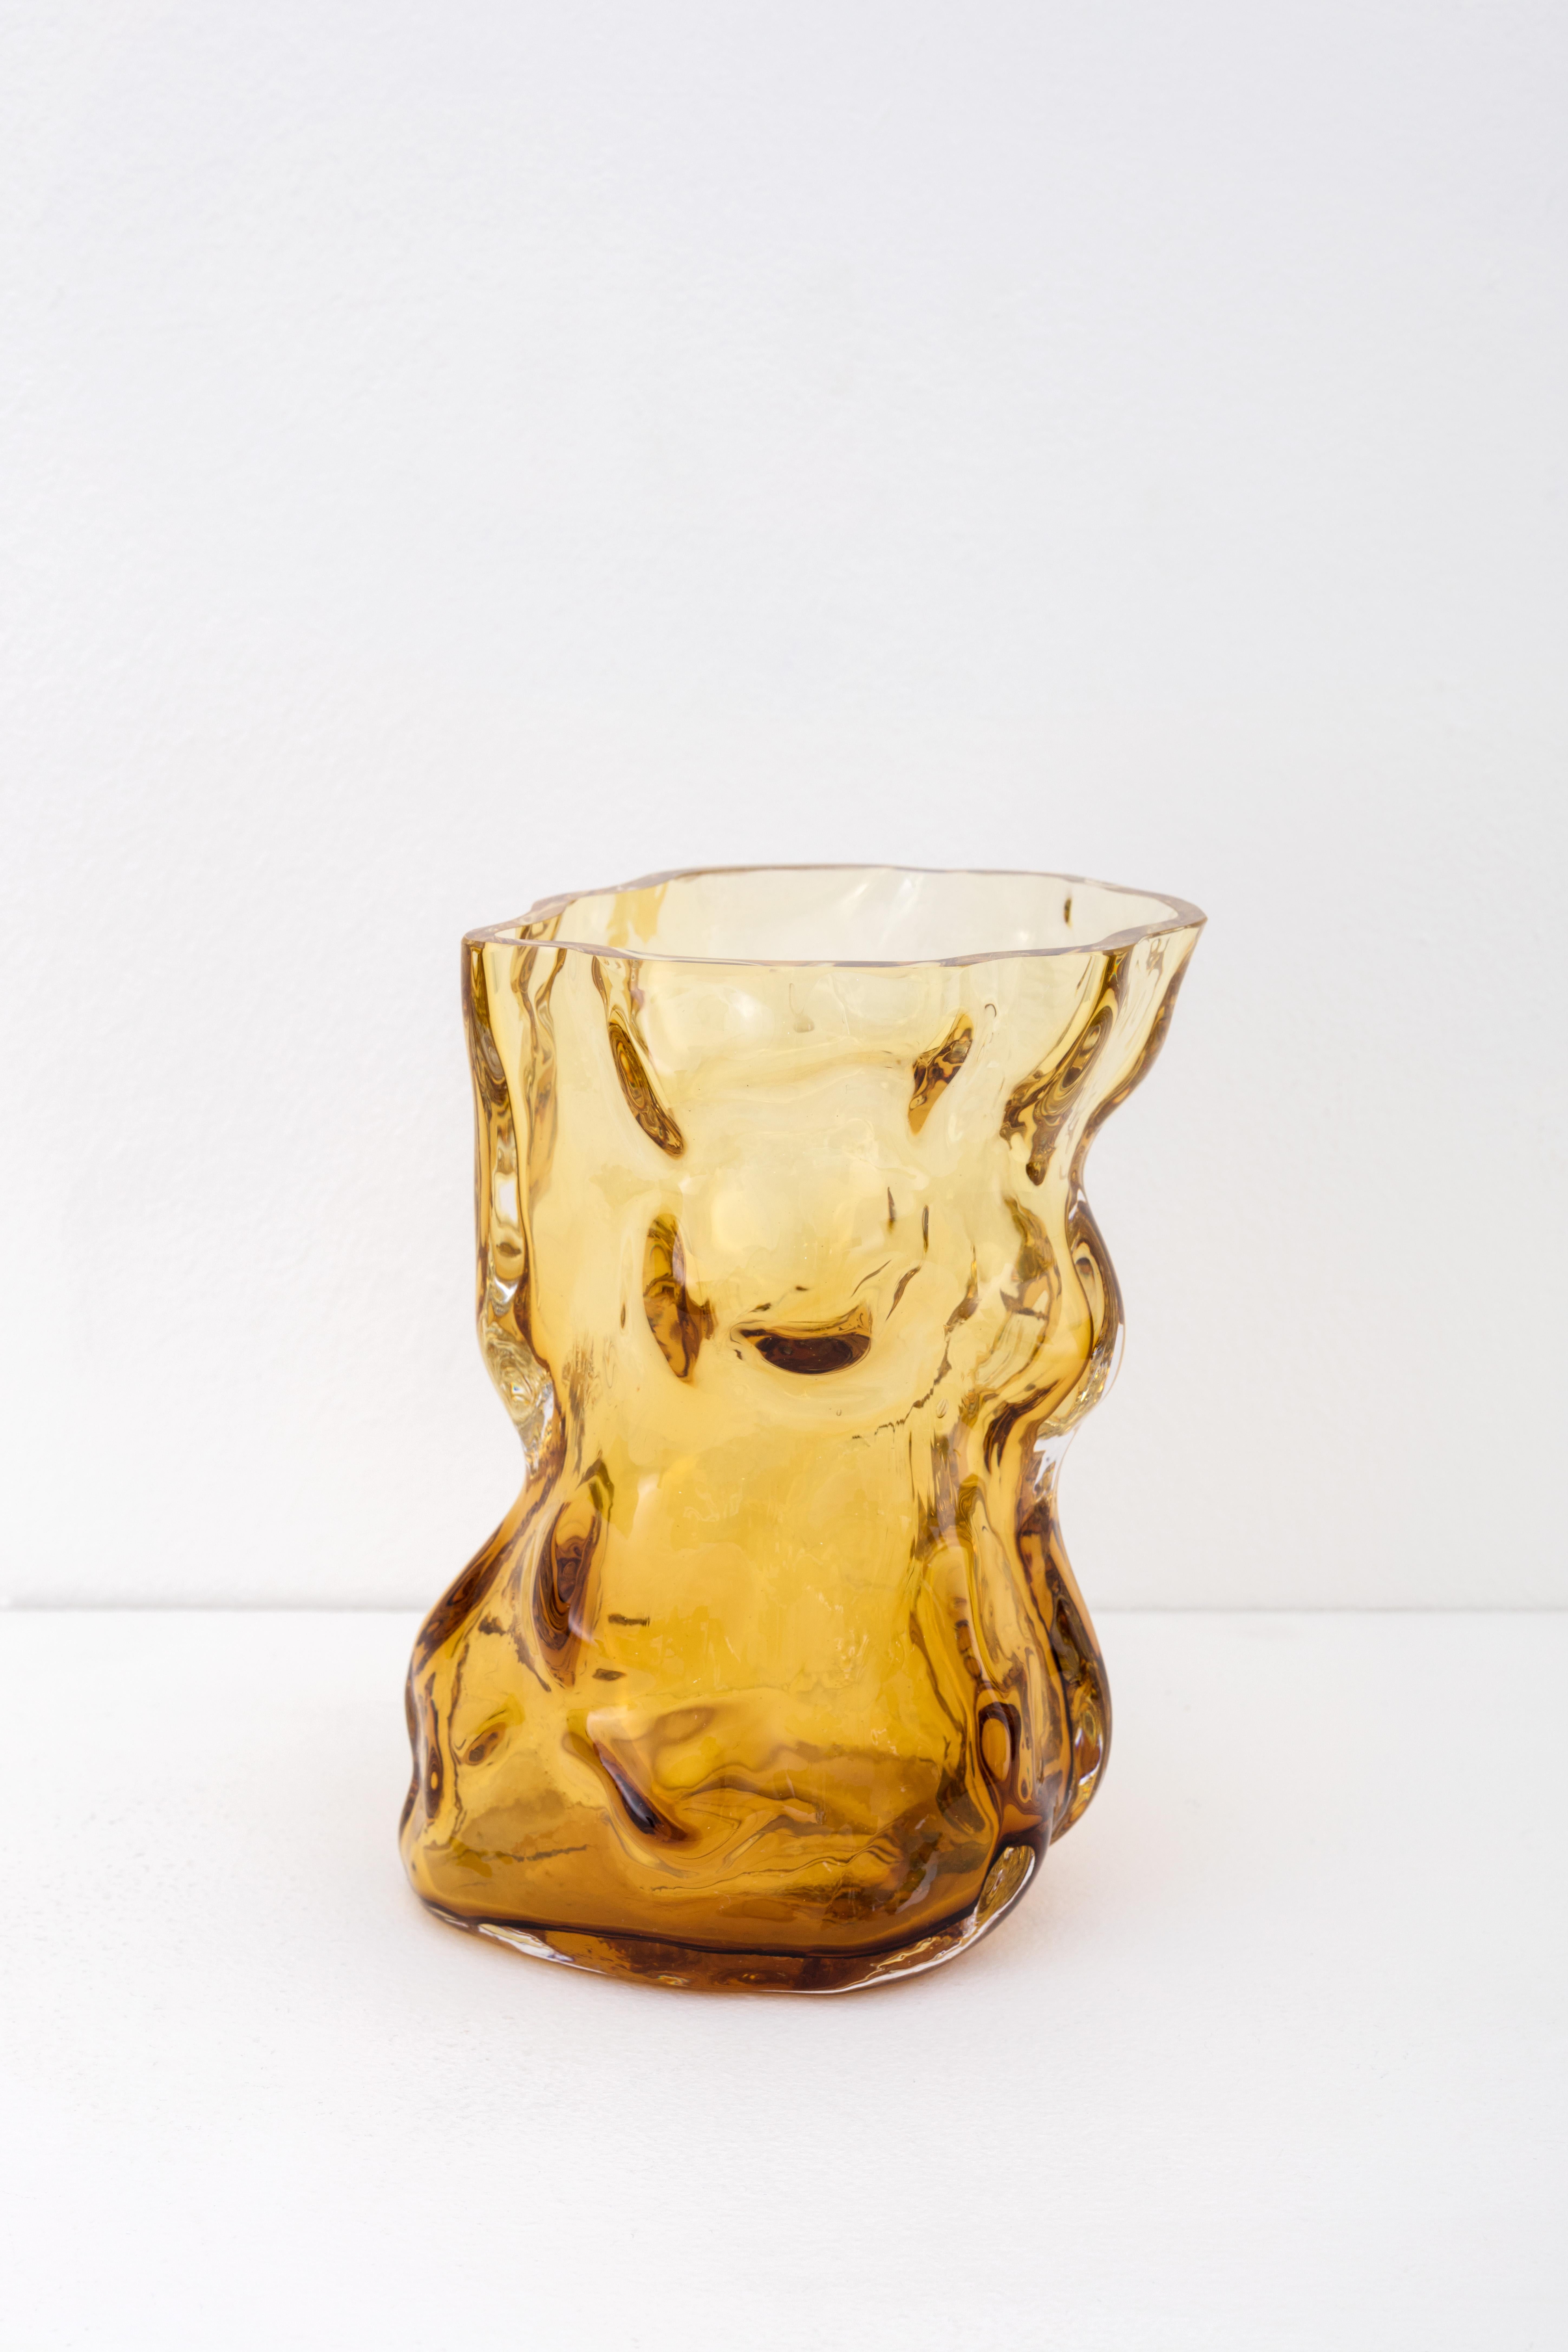 Moulded and then mouth blown glass

One of a kind

The Mountain vases by FOS embody the surface of the mountain, calibrated to the size of human interiors. FOS explains, “It’s limited what references an object into a vase, other than a flower: A